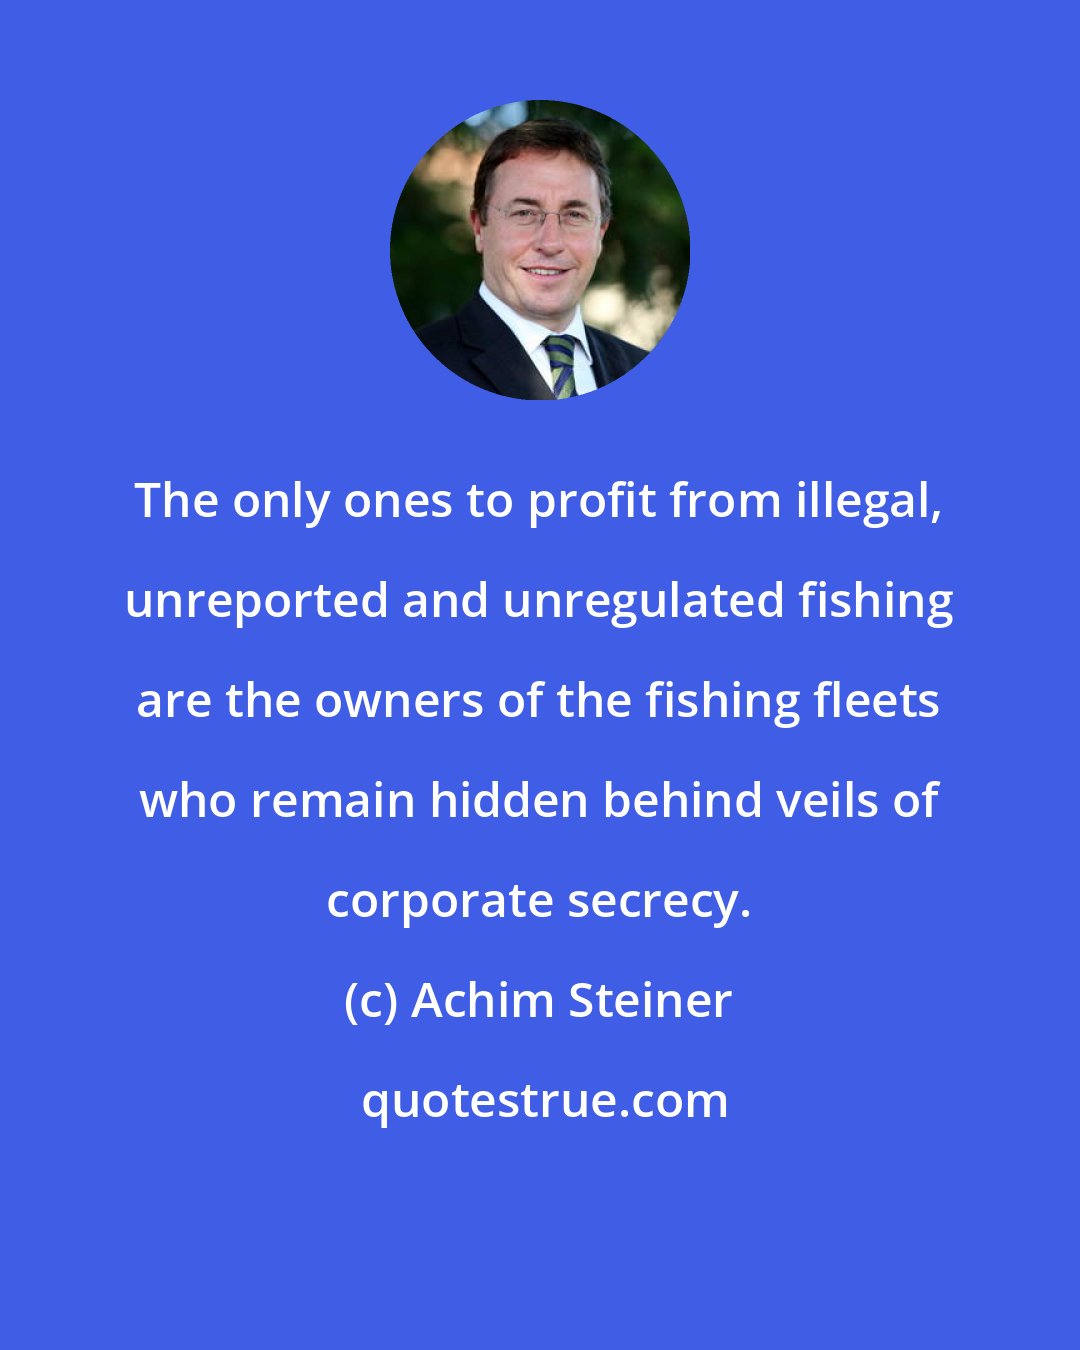 Achim Steiner: The only ones to profit from illegal, unreported and unregulated fishing are the owners of the fishing fleets who remain hidden behind veils of corporate secrecy.